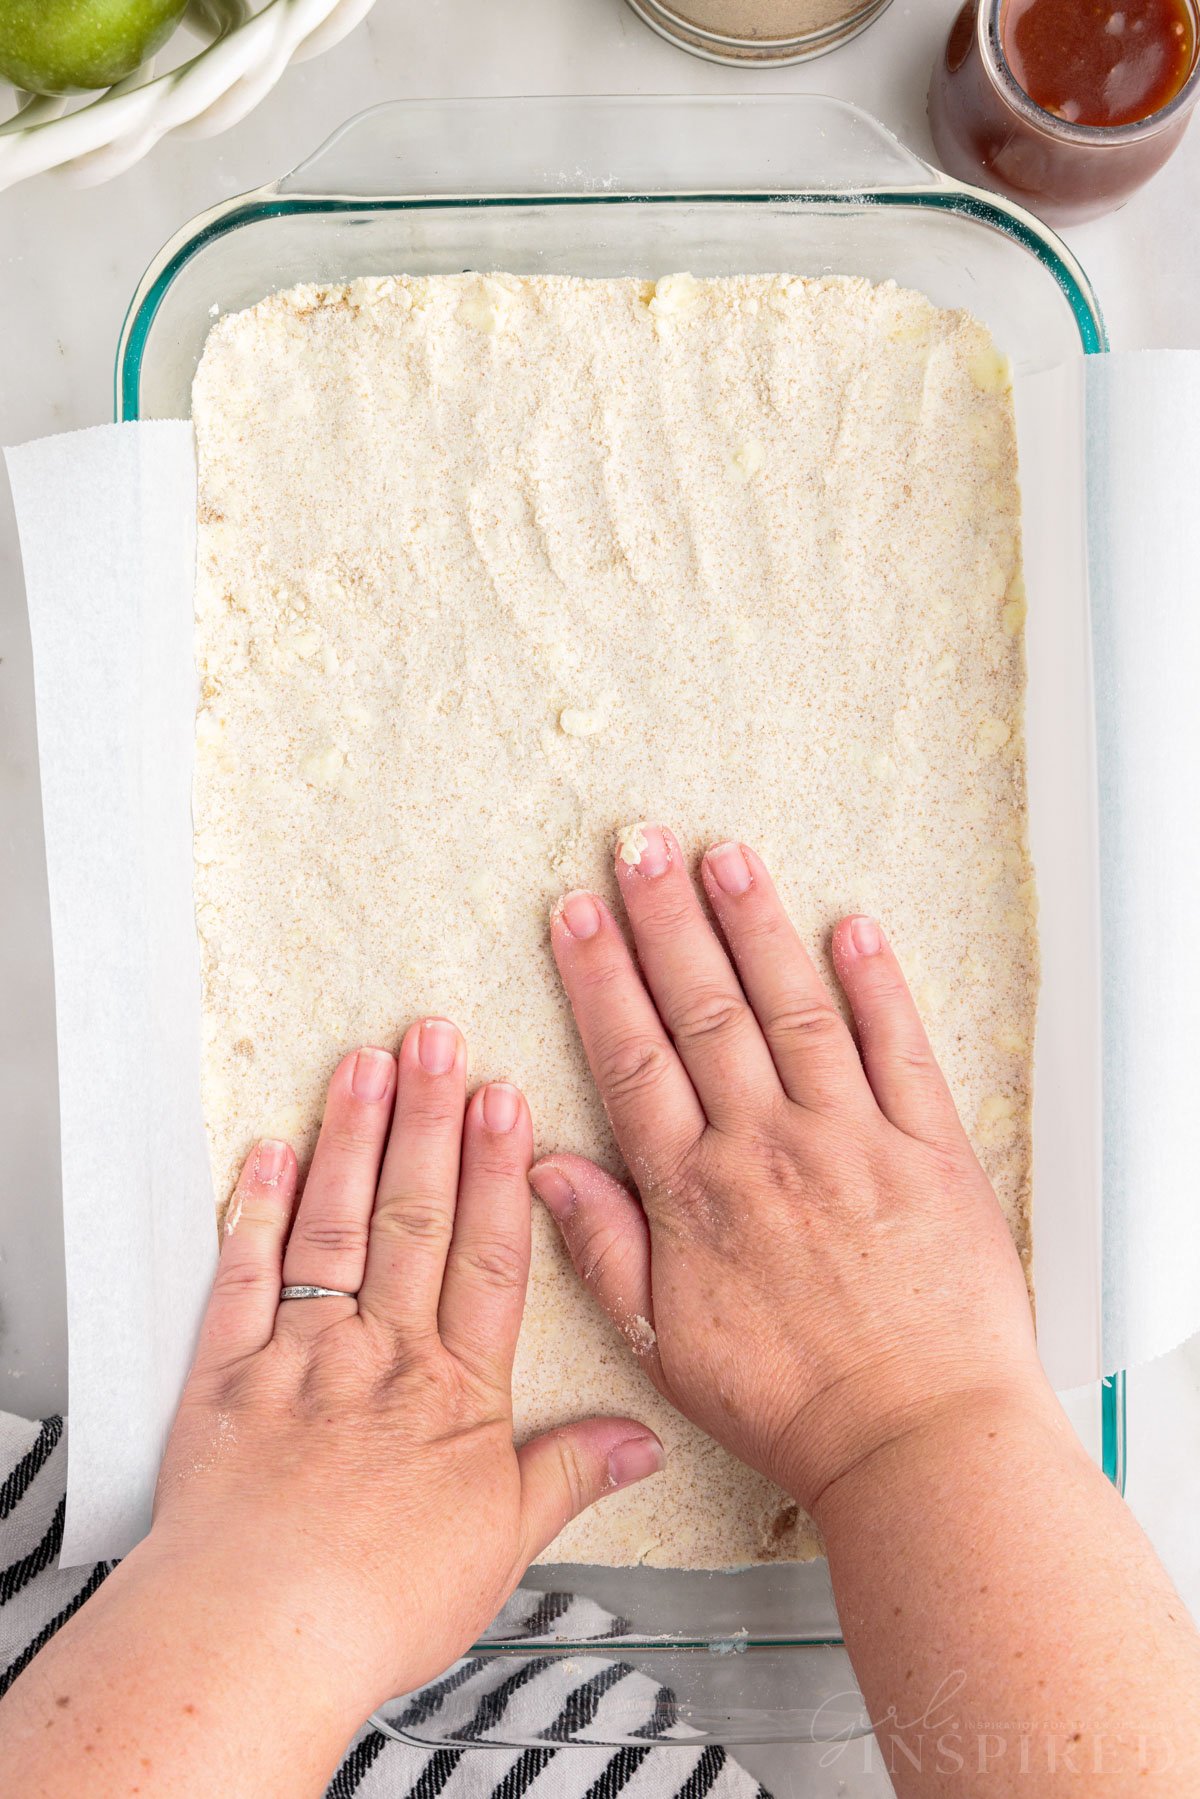 Hands pressing shortbread crust ingredients into parchment paper-lined glass baking dish.